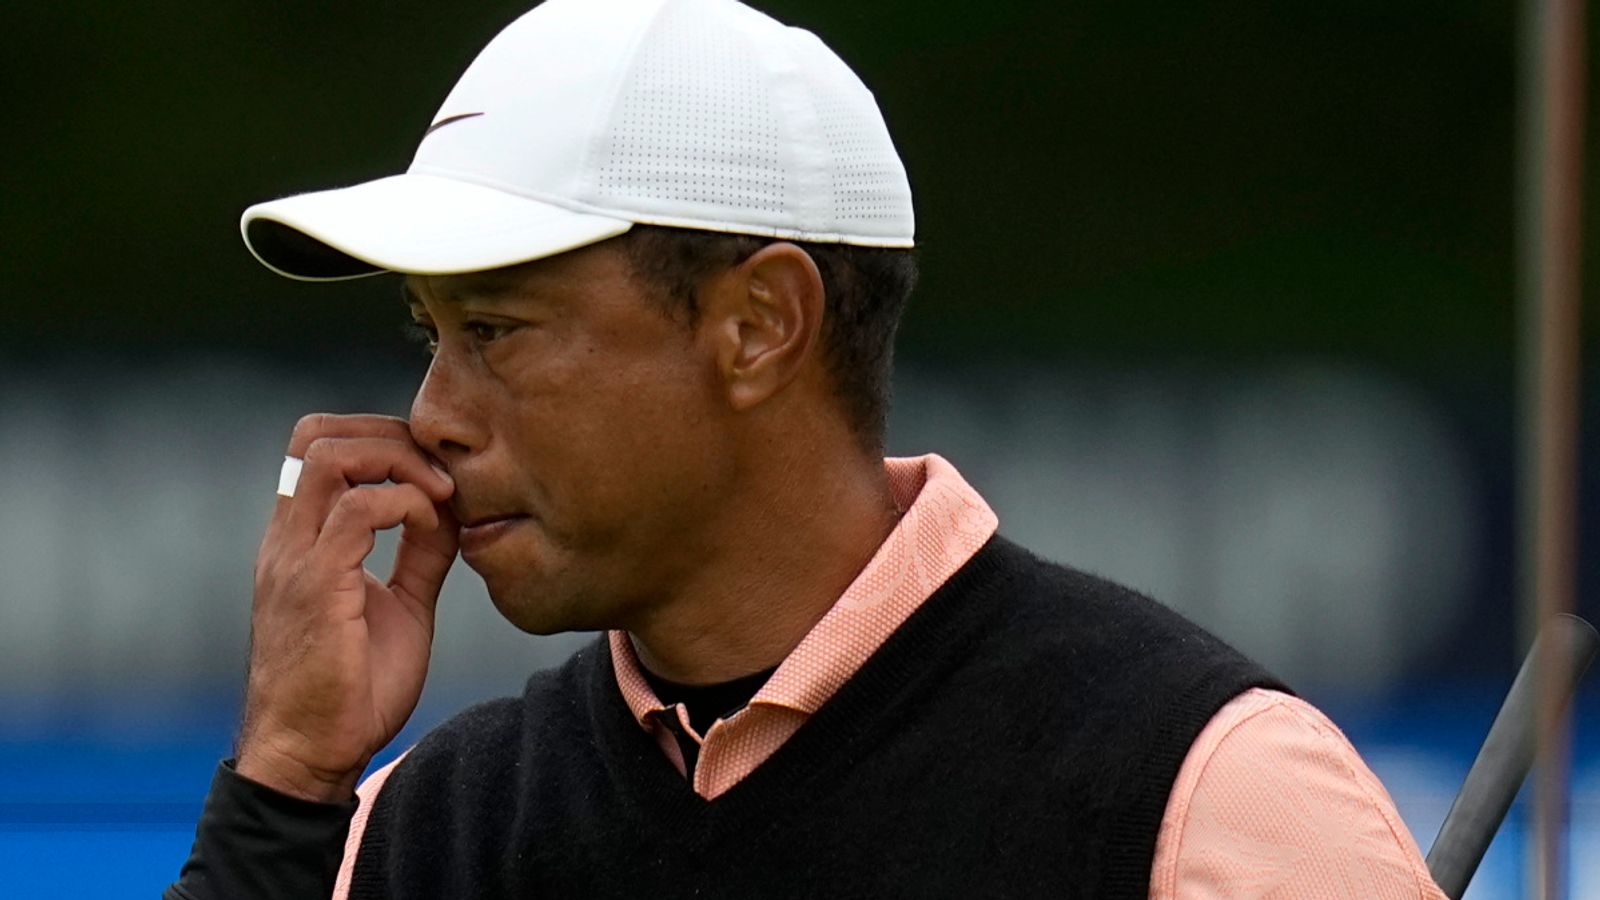 PGA Championship: Tiger Woods withdraws after third round at Southern Hills due to injury